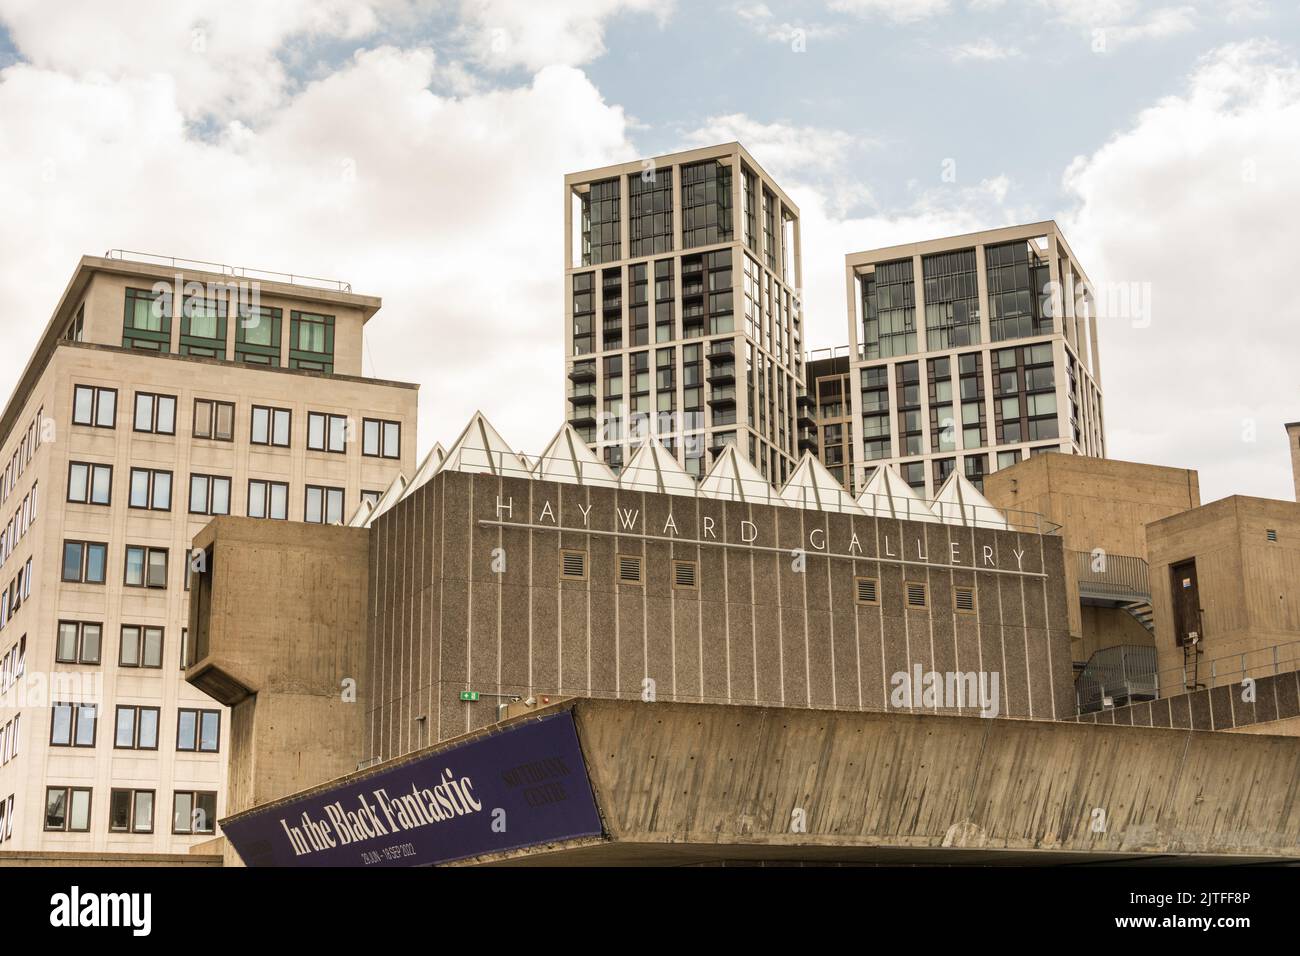 The Hayward Gallery, Southbank Center, Belvedere Road, Londres, SE1, ROYAUME-UNI Banque D'Images